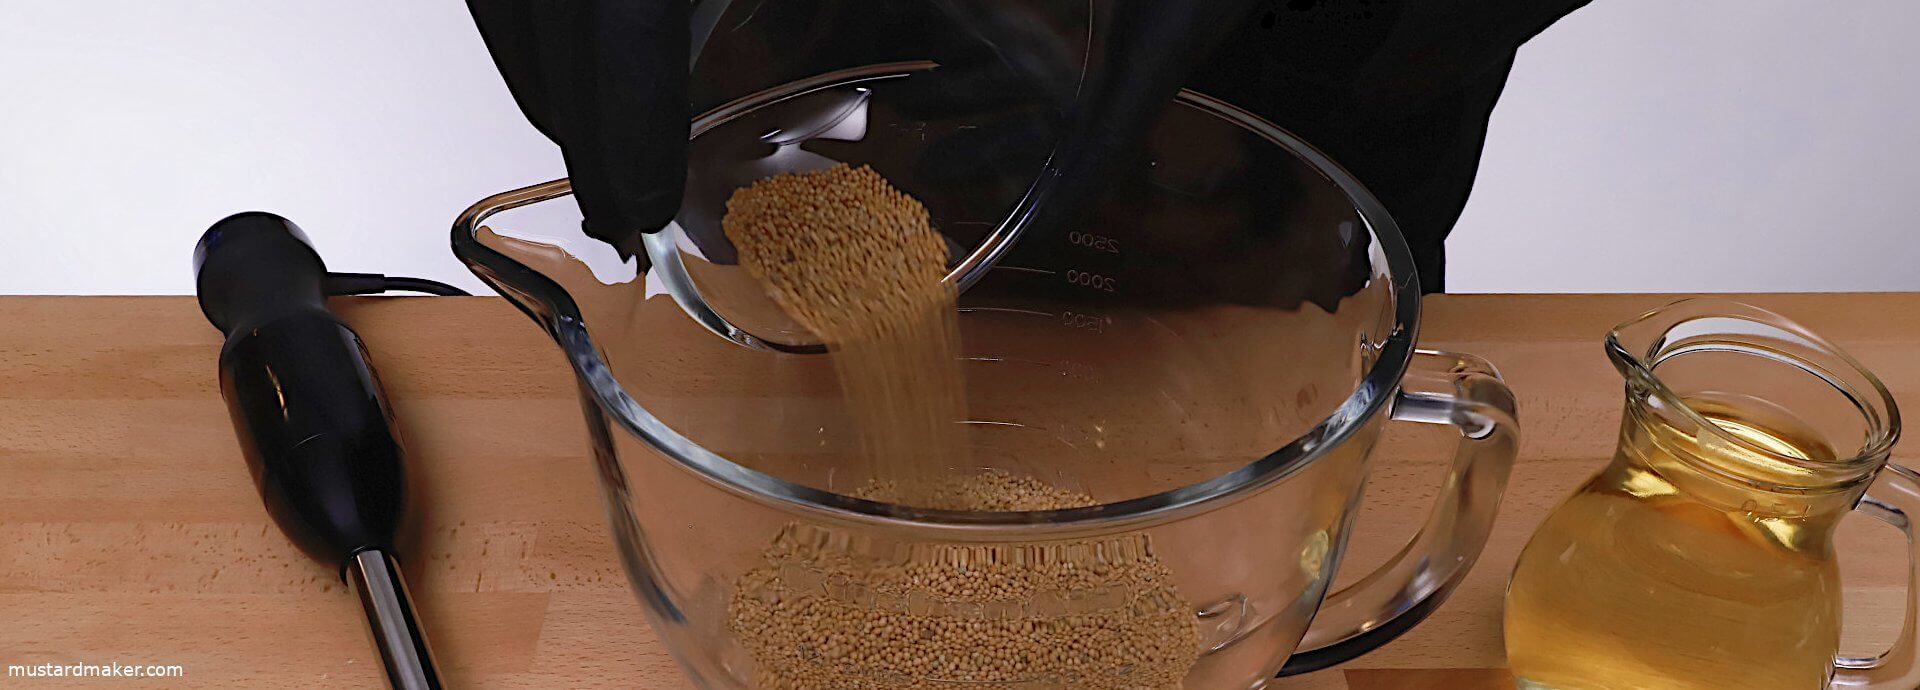 Step 1: Place the mustard seeds in a large bowl.